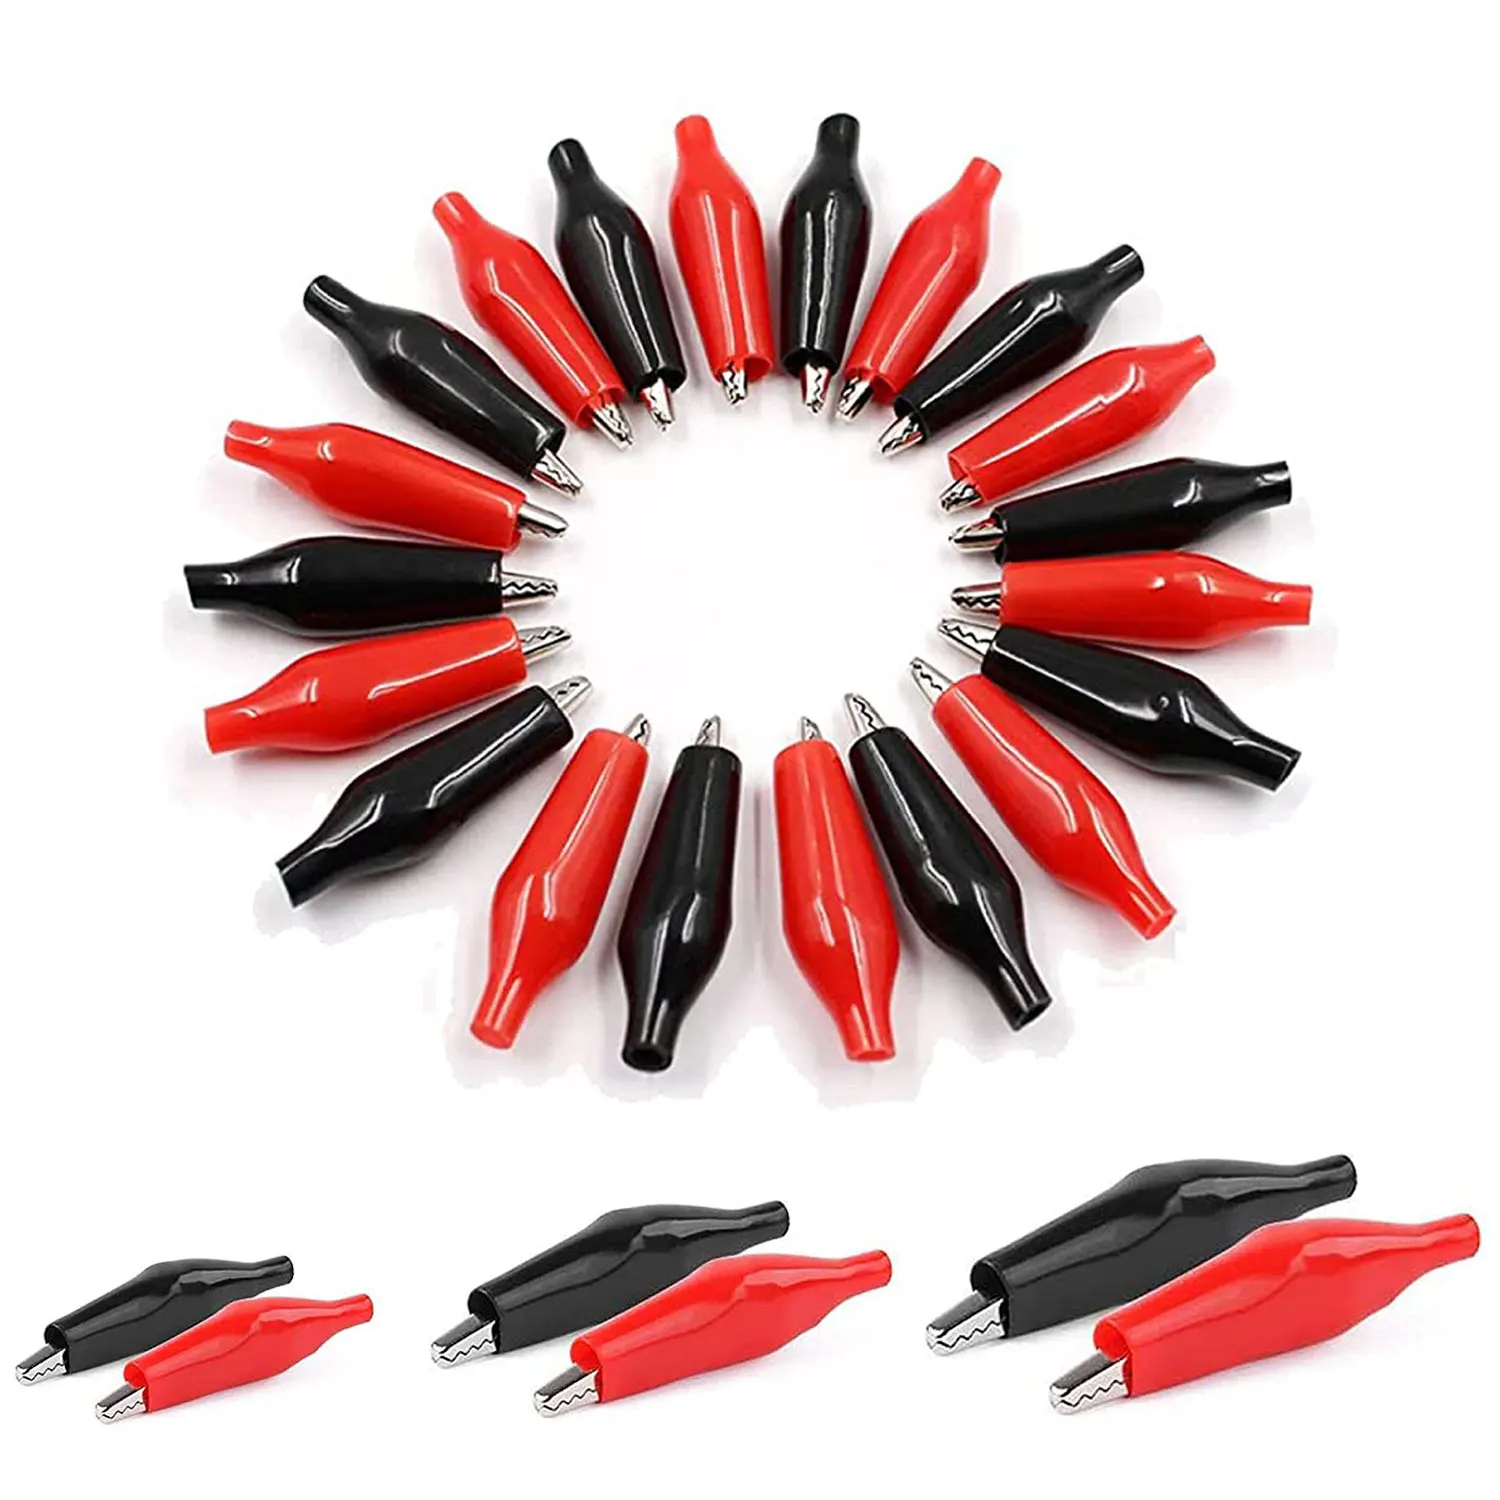 

10pcs/lot 28mm/35mm/45mm Metal Alligator Clip G98 Crocodile Electrical Clamp for Testing Probe Meter Black/Red with Plastic Boot